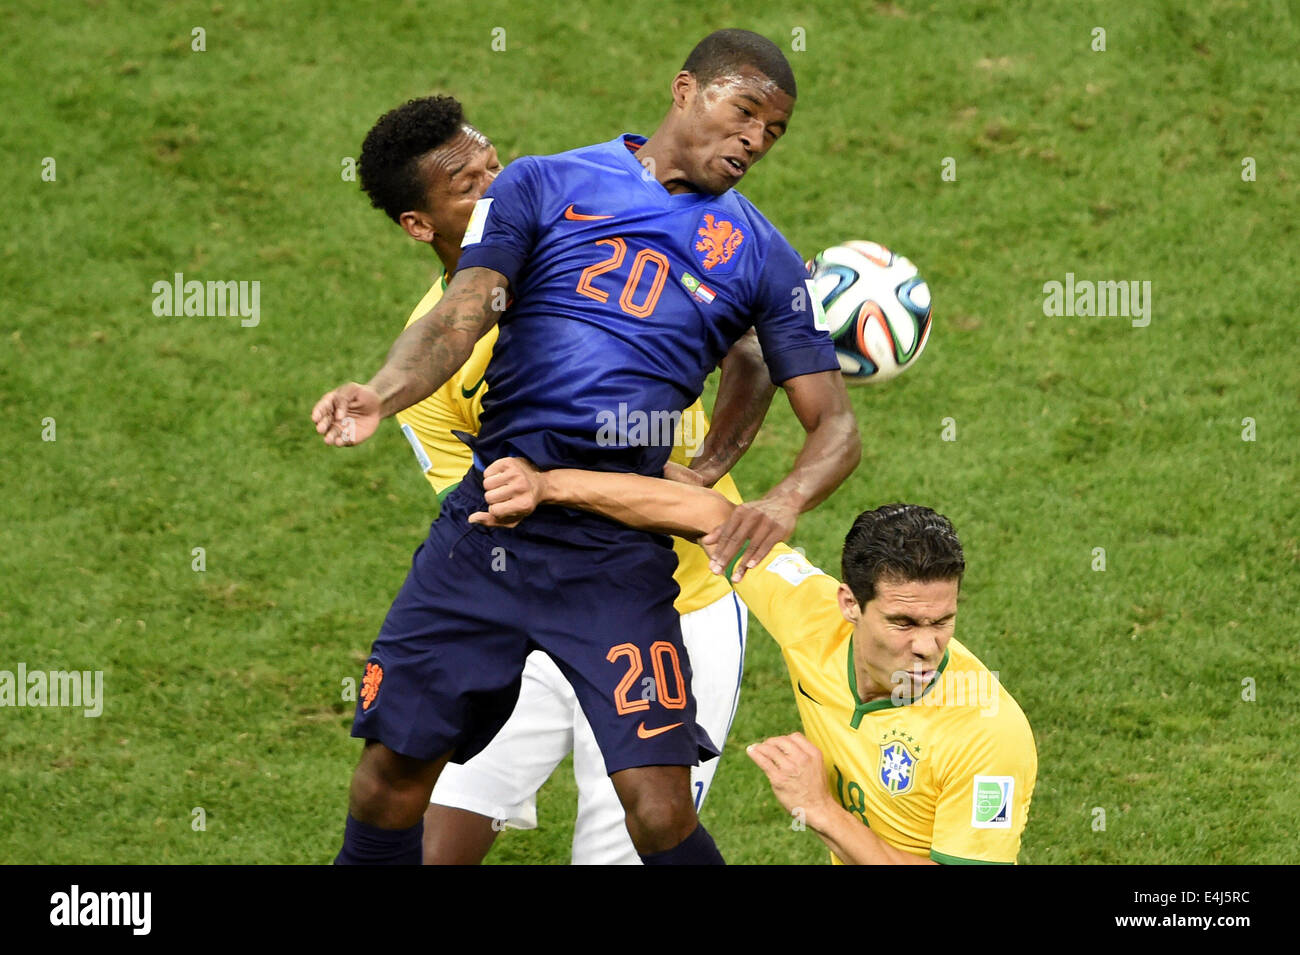 Brasilia, Brazil. 12th July, 2014. Netherlands' Georginio Wijnaldum (C) vies with Brazil's Jo (L) and Hernanes during the third place play-off match between Brazil and Netherlands of 2014 FIFA World Cup at the Estadio Nacional Stadium in Brasilia, Brazil, on July 12, 2014. Netherlands won 3-0 over Brazil and took the third place of the tournament on Saturday. Credit:  Lui Siu Wai/Xinhua/Alamy Live News Stock Photo